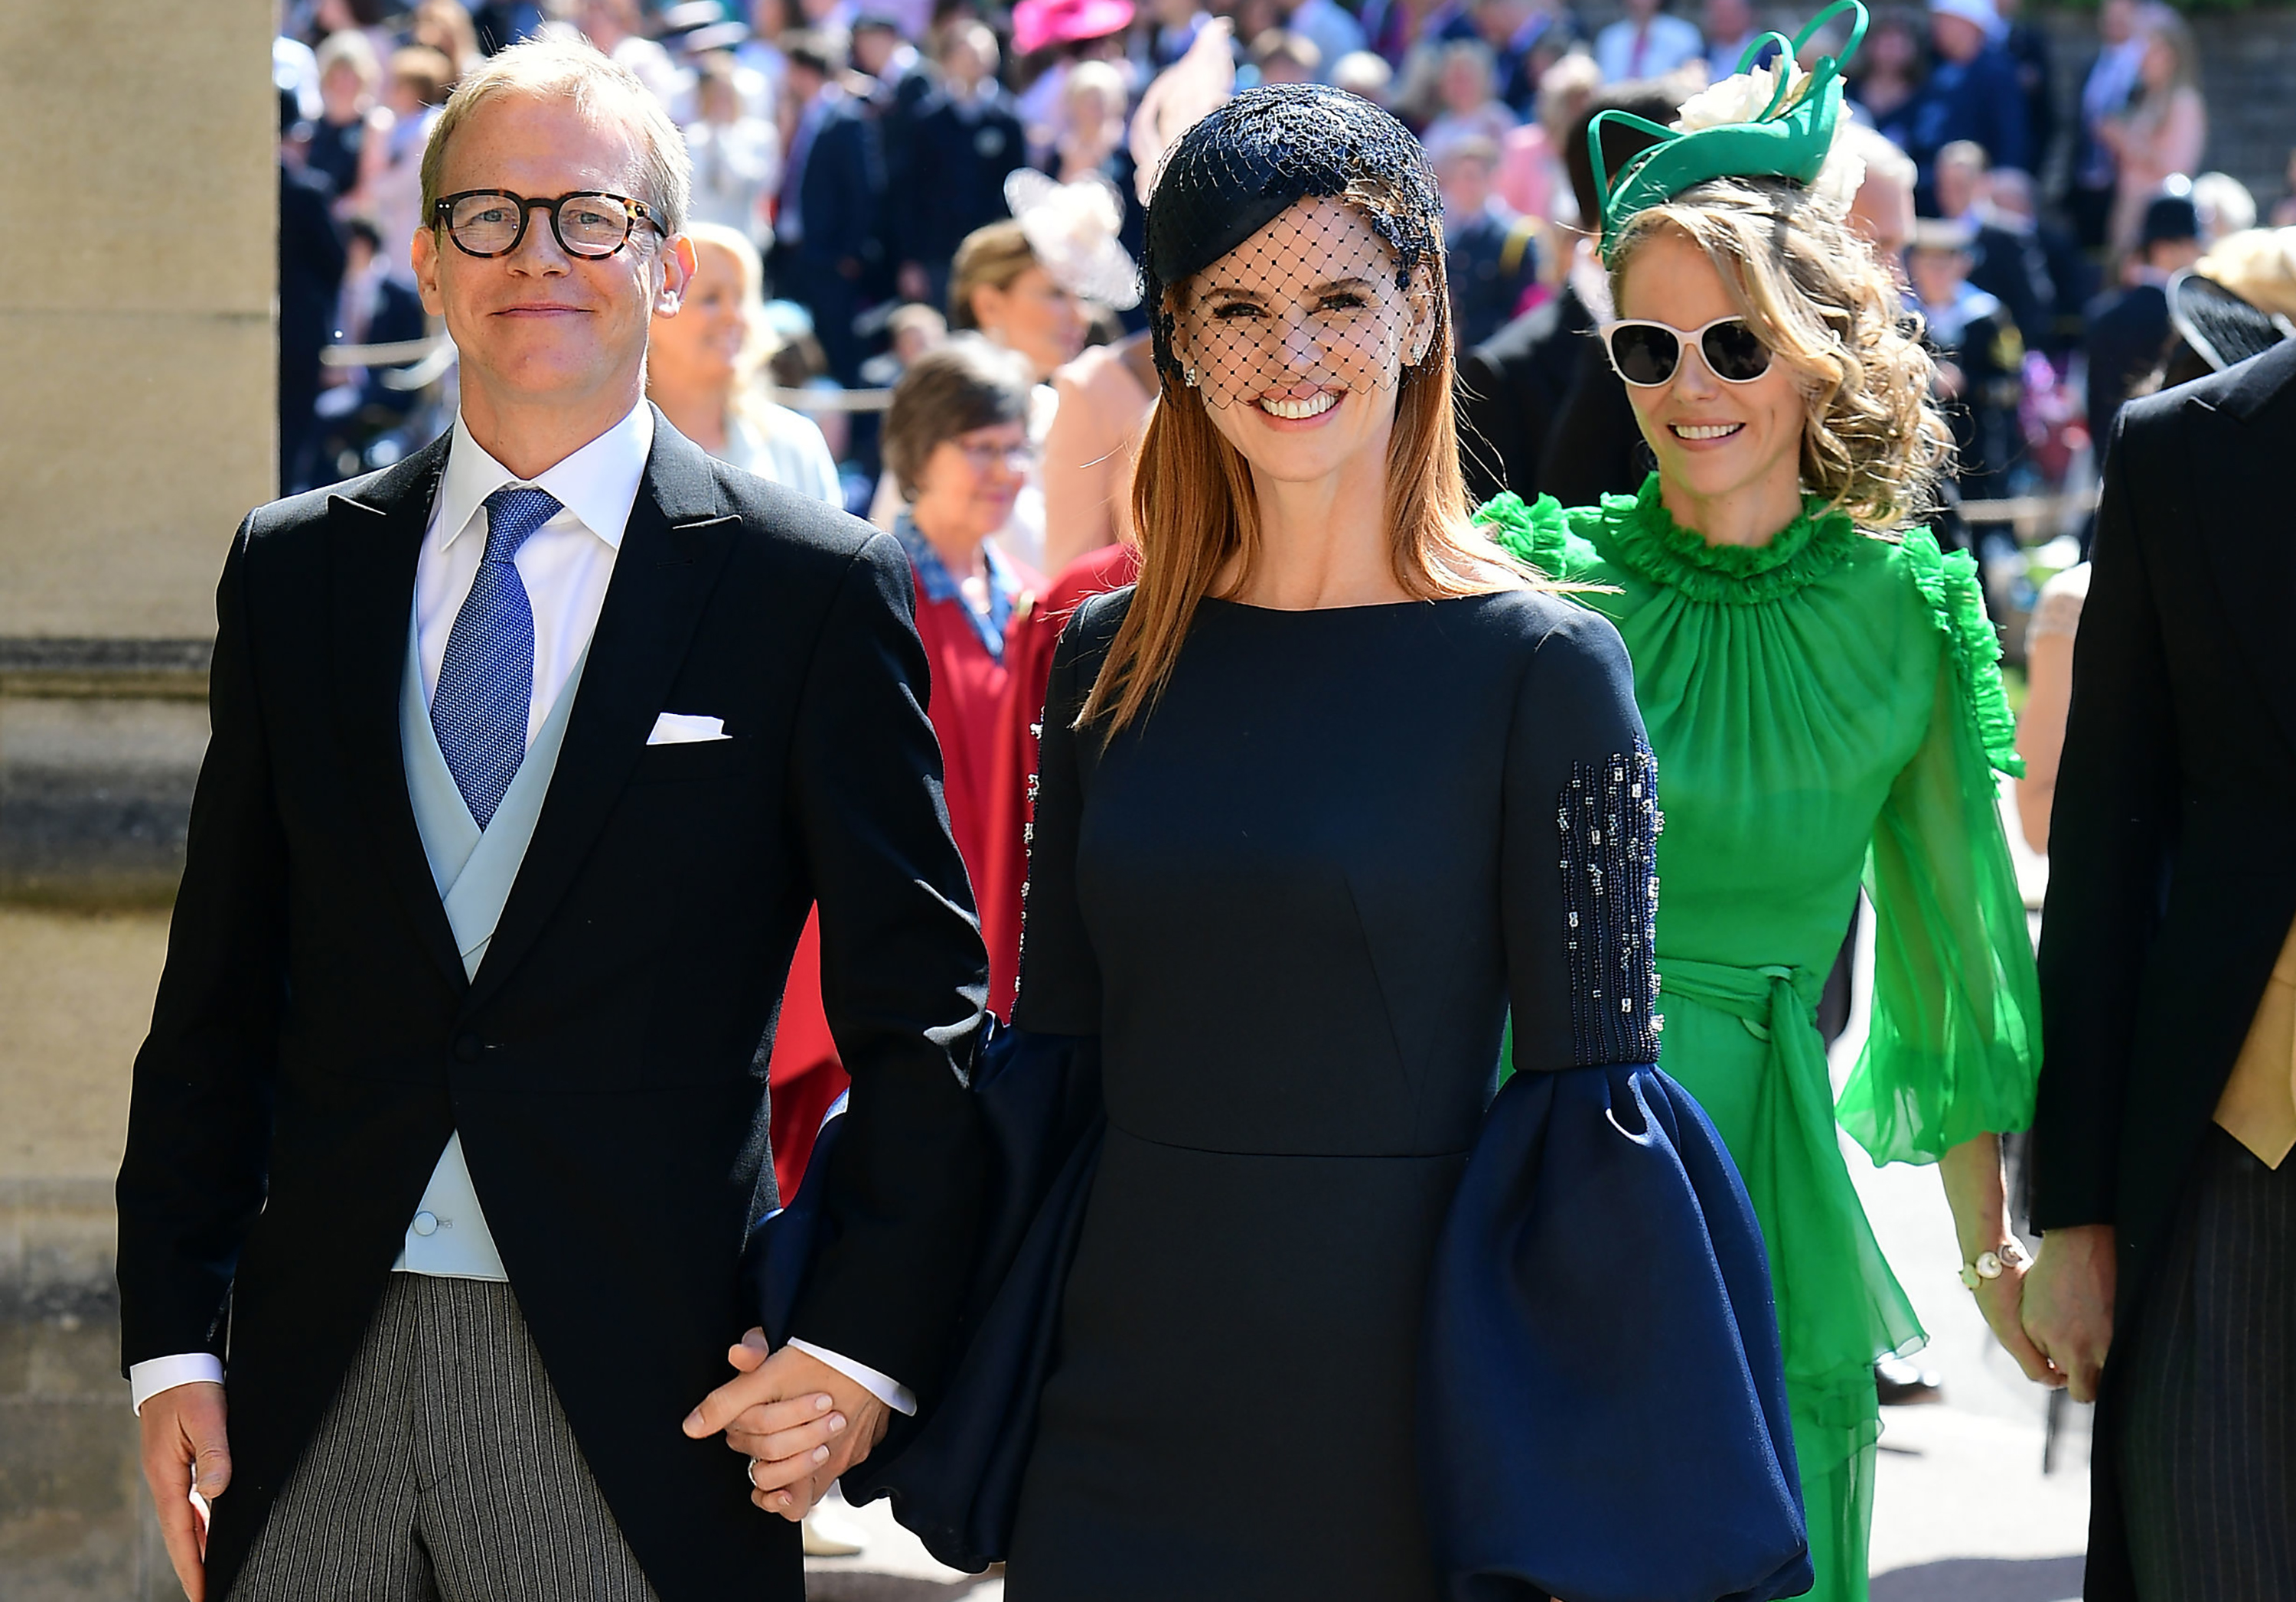 Sarah Rafferty and her husband Santtu Seppälä arrive for the wedding ceremony of Prince Harry and Meghan Markle at St George's Chapel, Windsor Castle, in Windsor, on May 19, 2018. | Source: Getty Images